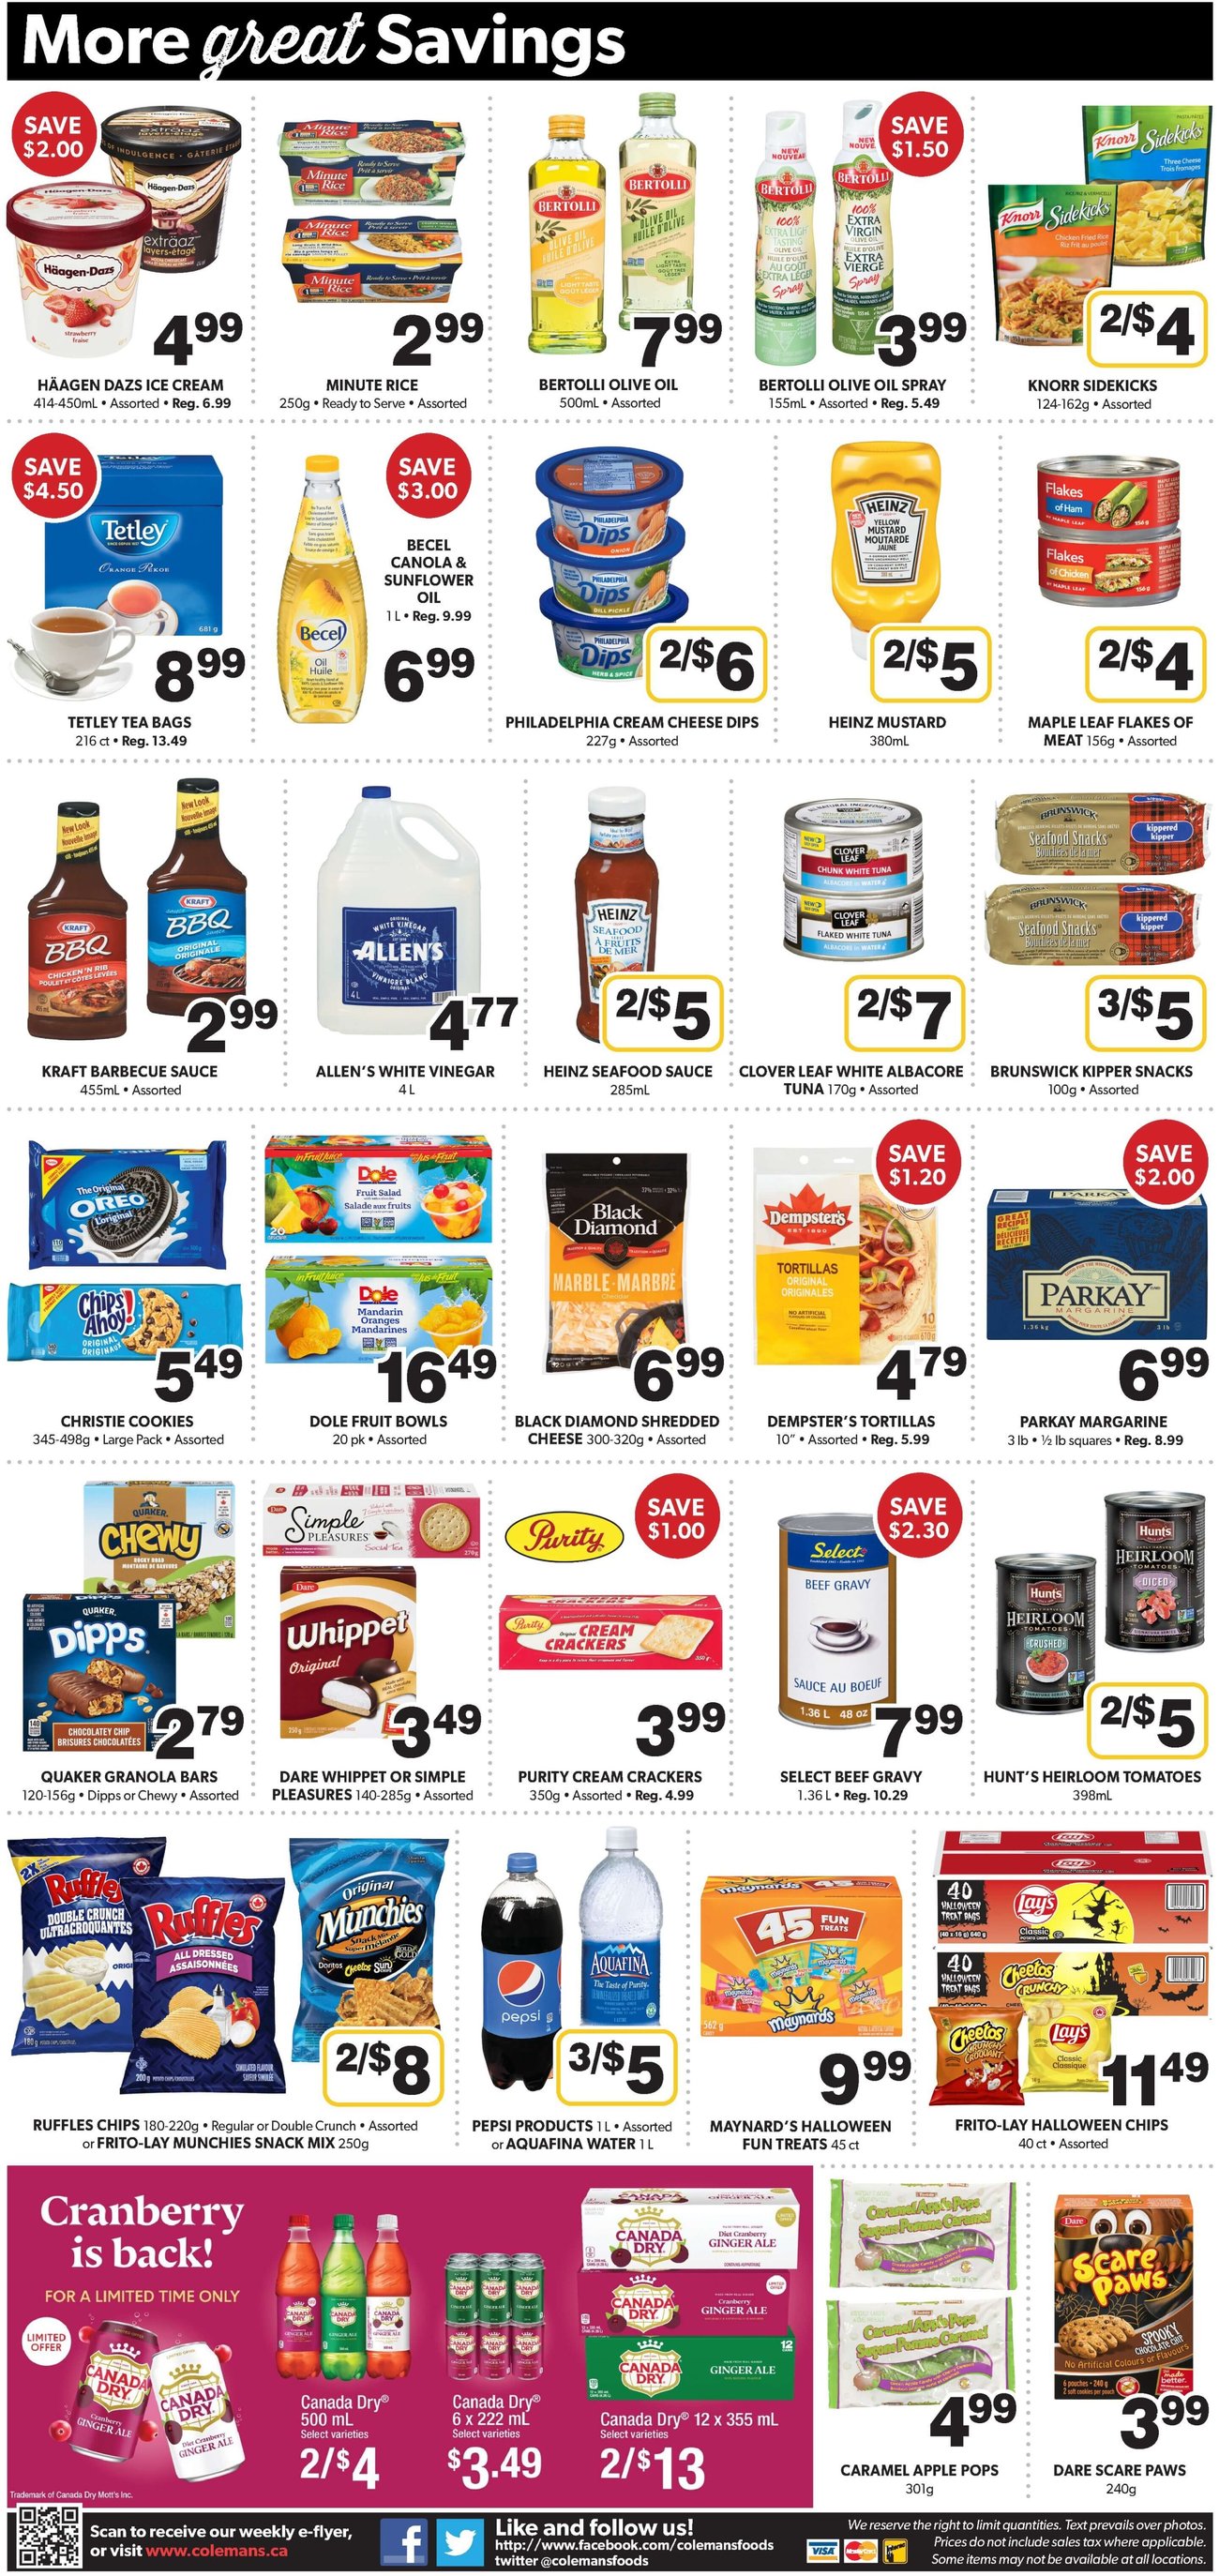 Colemans - Weekly Flyer Specials - Page 7